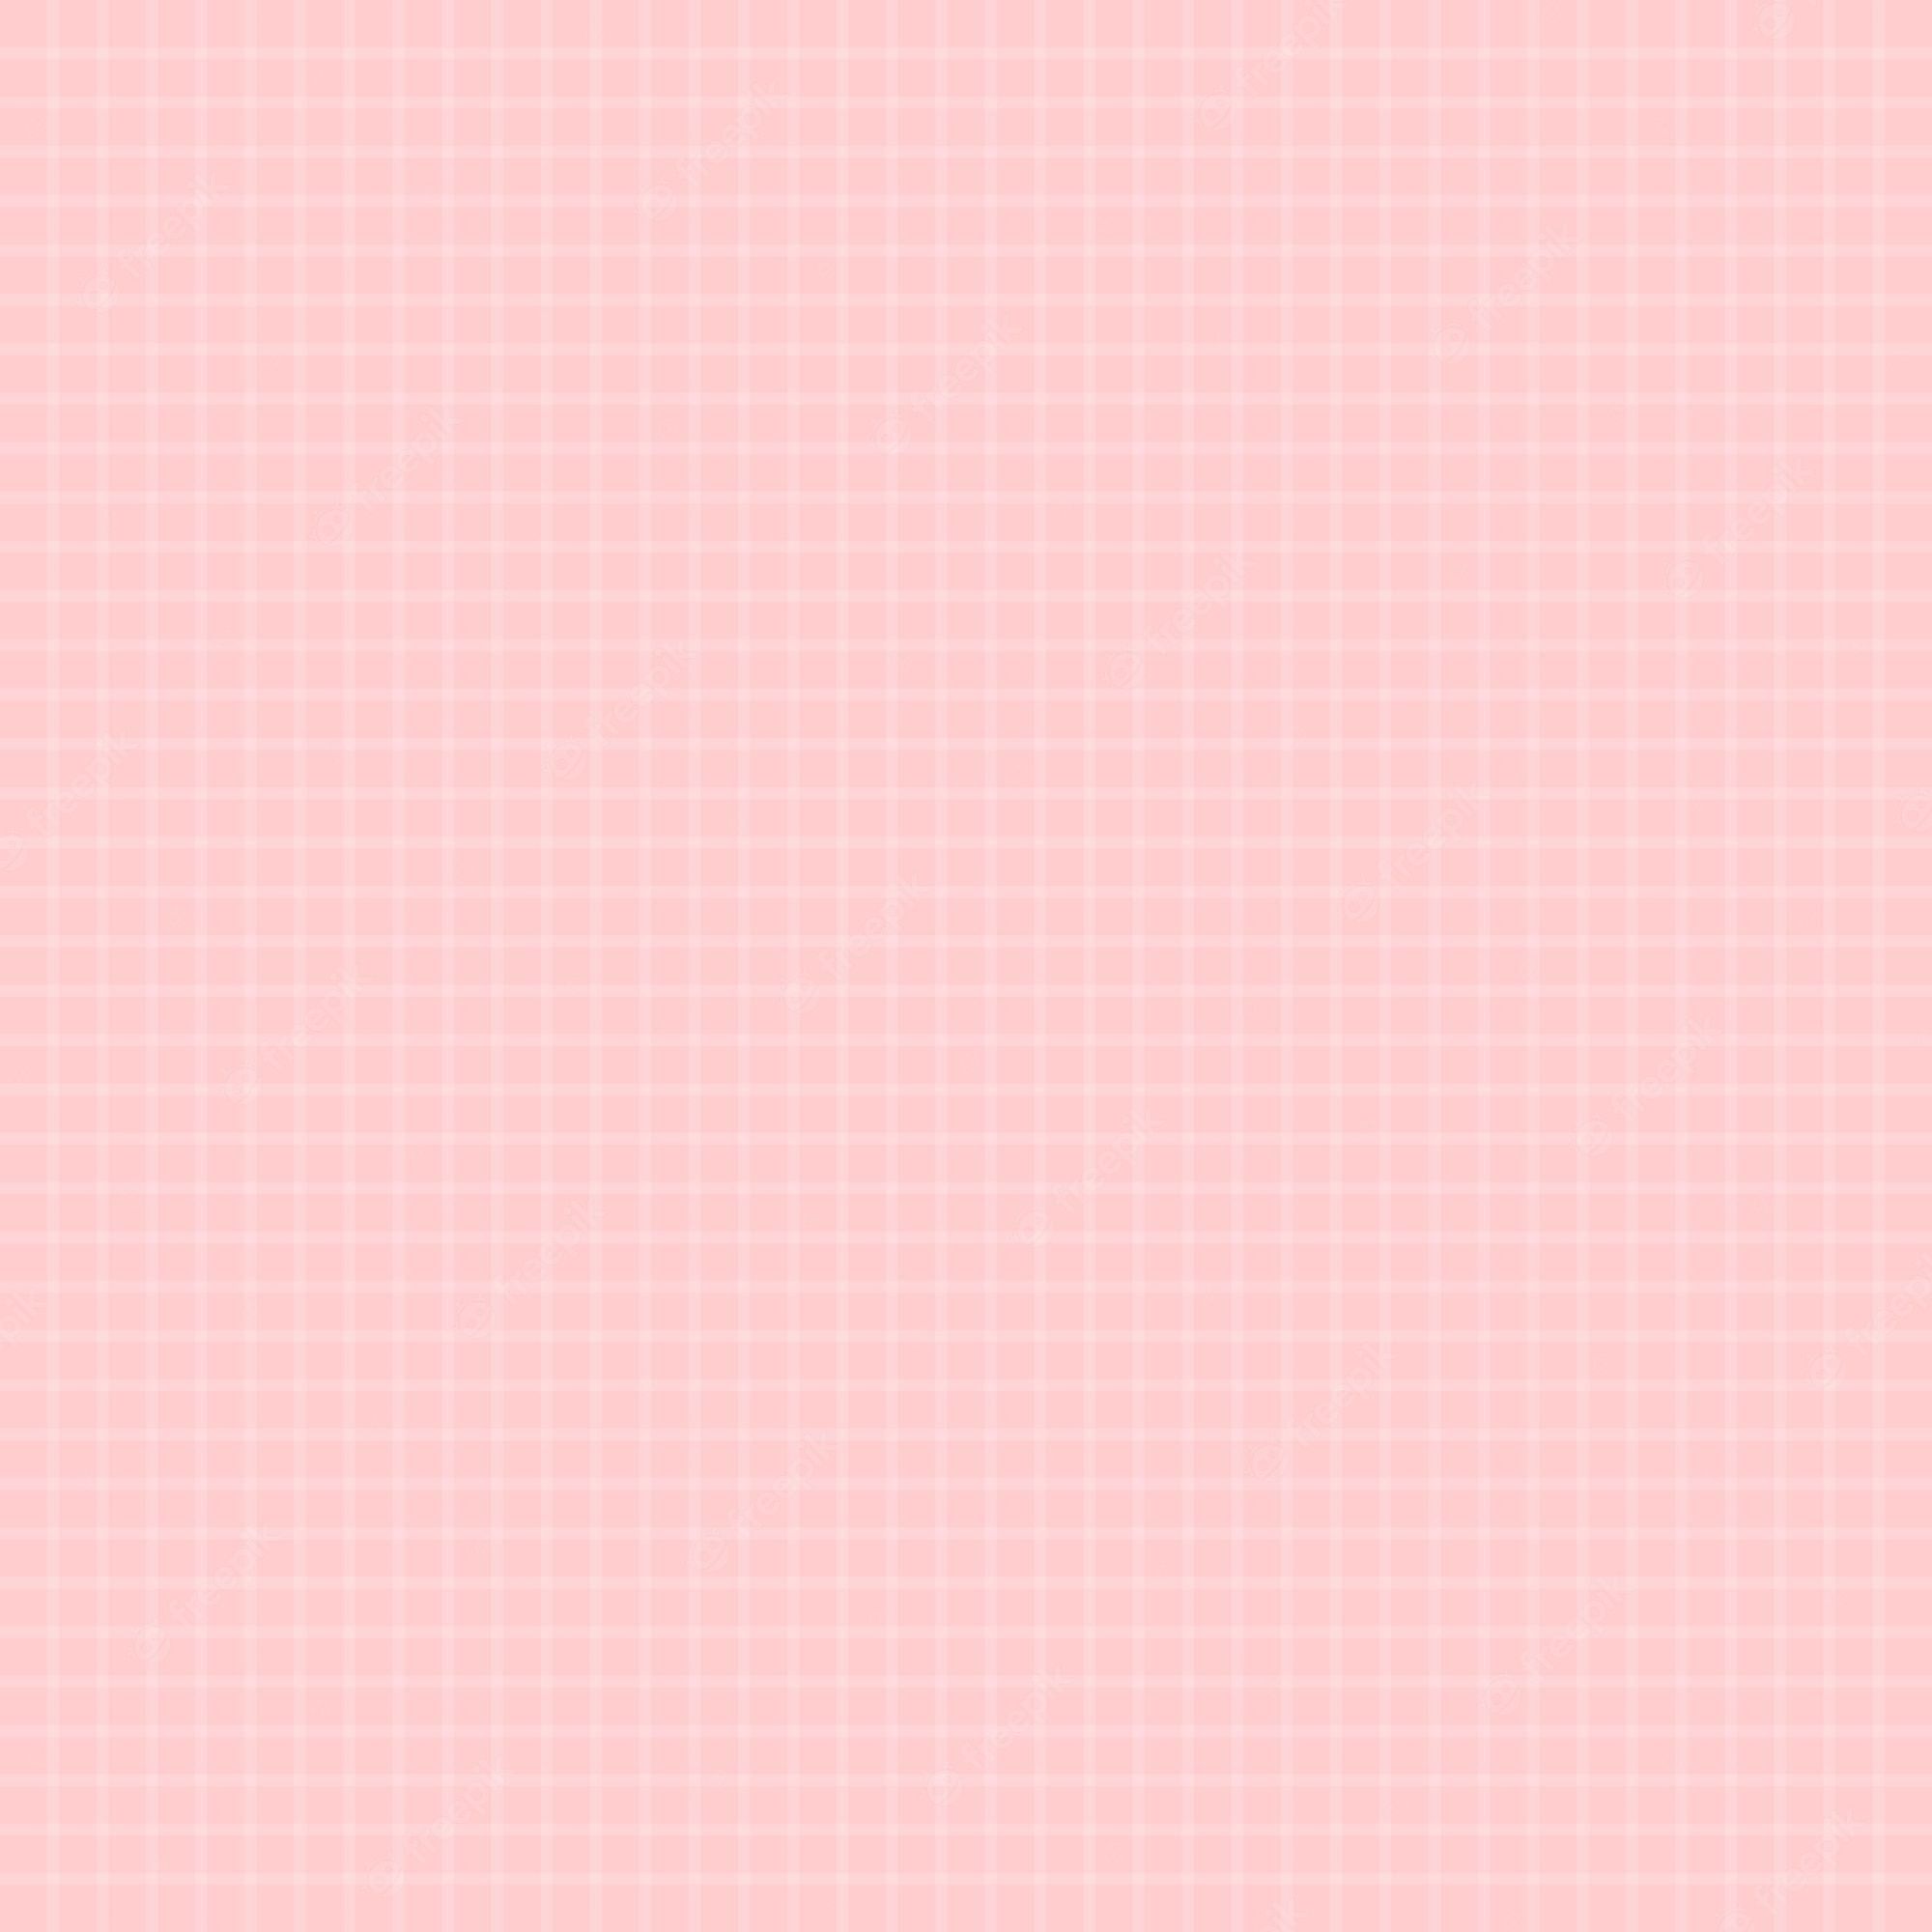 Premium Vector. Vector hot pink aesthetic grid pattern background